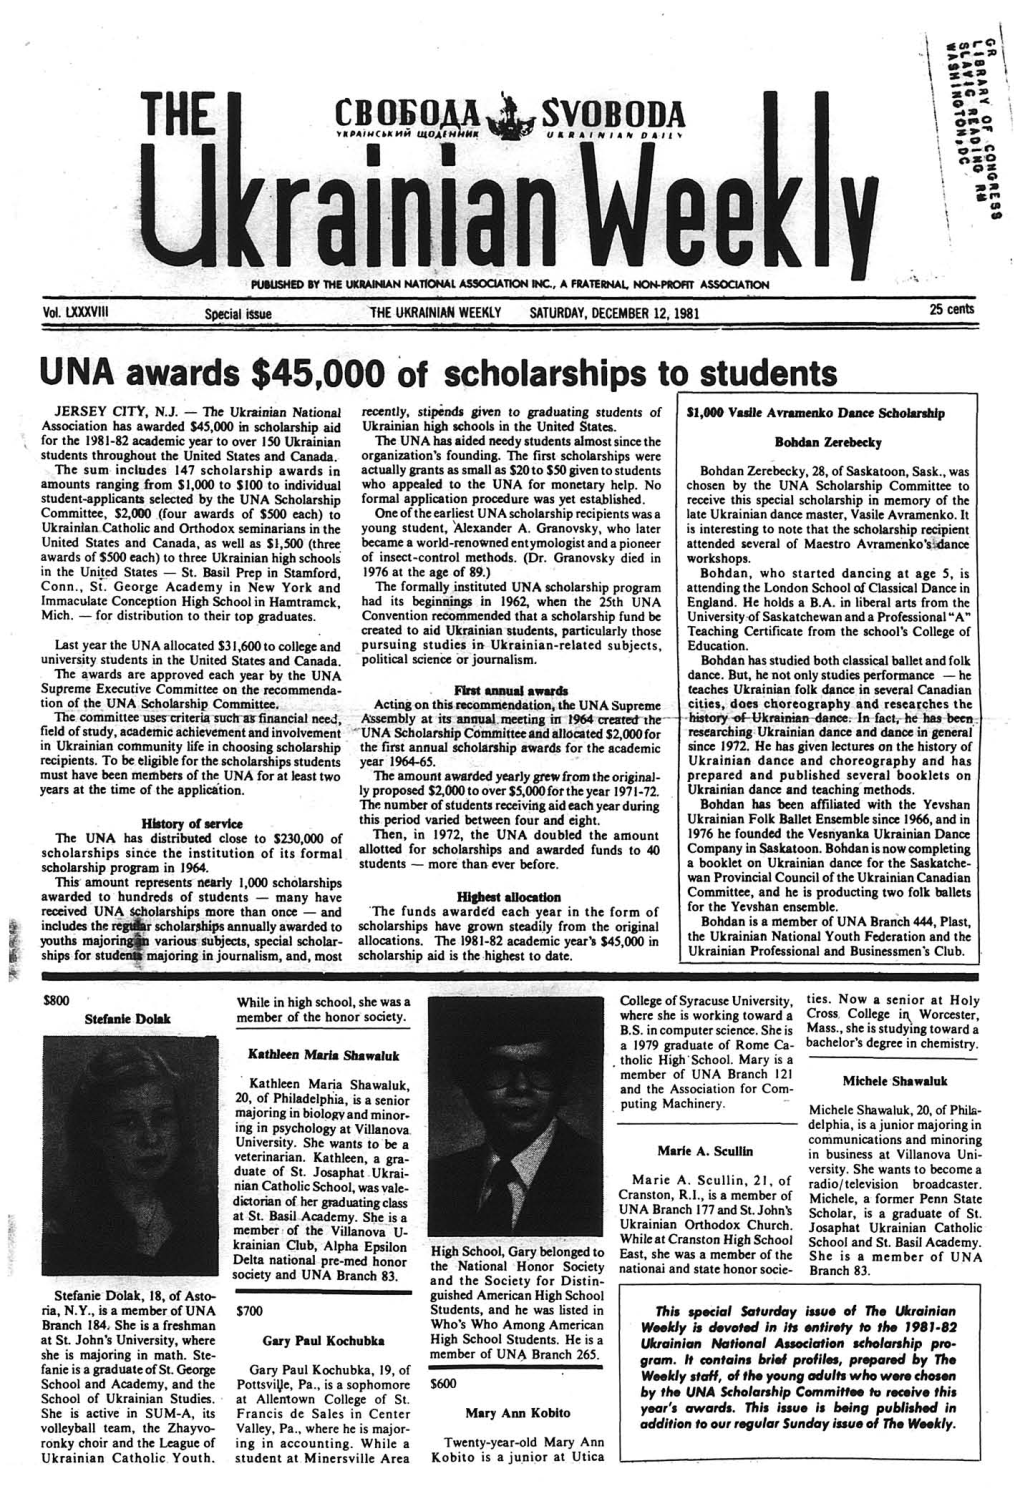 The Ukrainian Weekly 1981, Special Issue